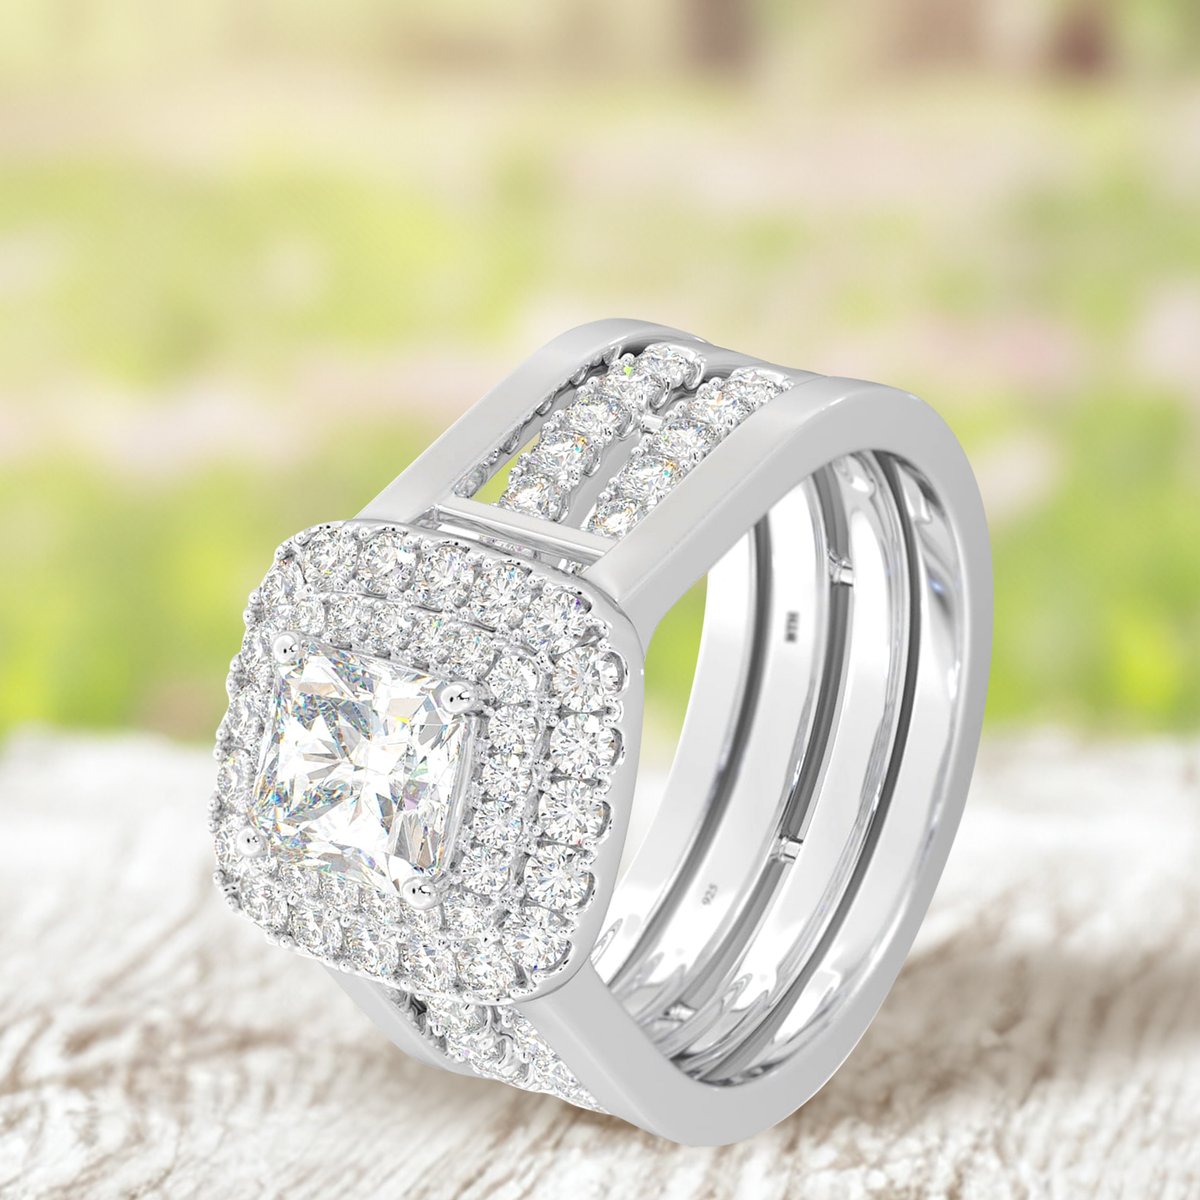 Too gorgeous to resist 💎

Buy this one here bit.ly/2BXvQYt

#womenrings #weddingrings #lovejewelry #silverjewelry #sterlingsilver #cubiczirconia #fashion #glamorous #besttohave #besttohavejewelry #gift #present #silverring #zirconia #silver925 #engagement #wedding